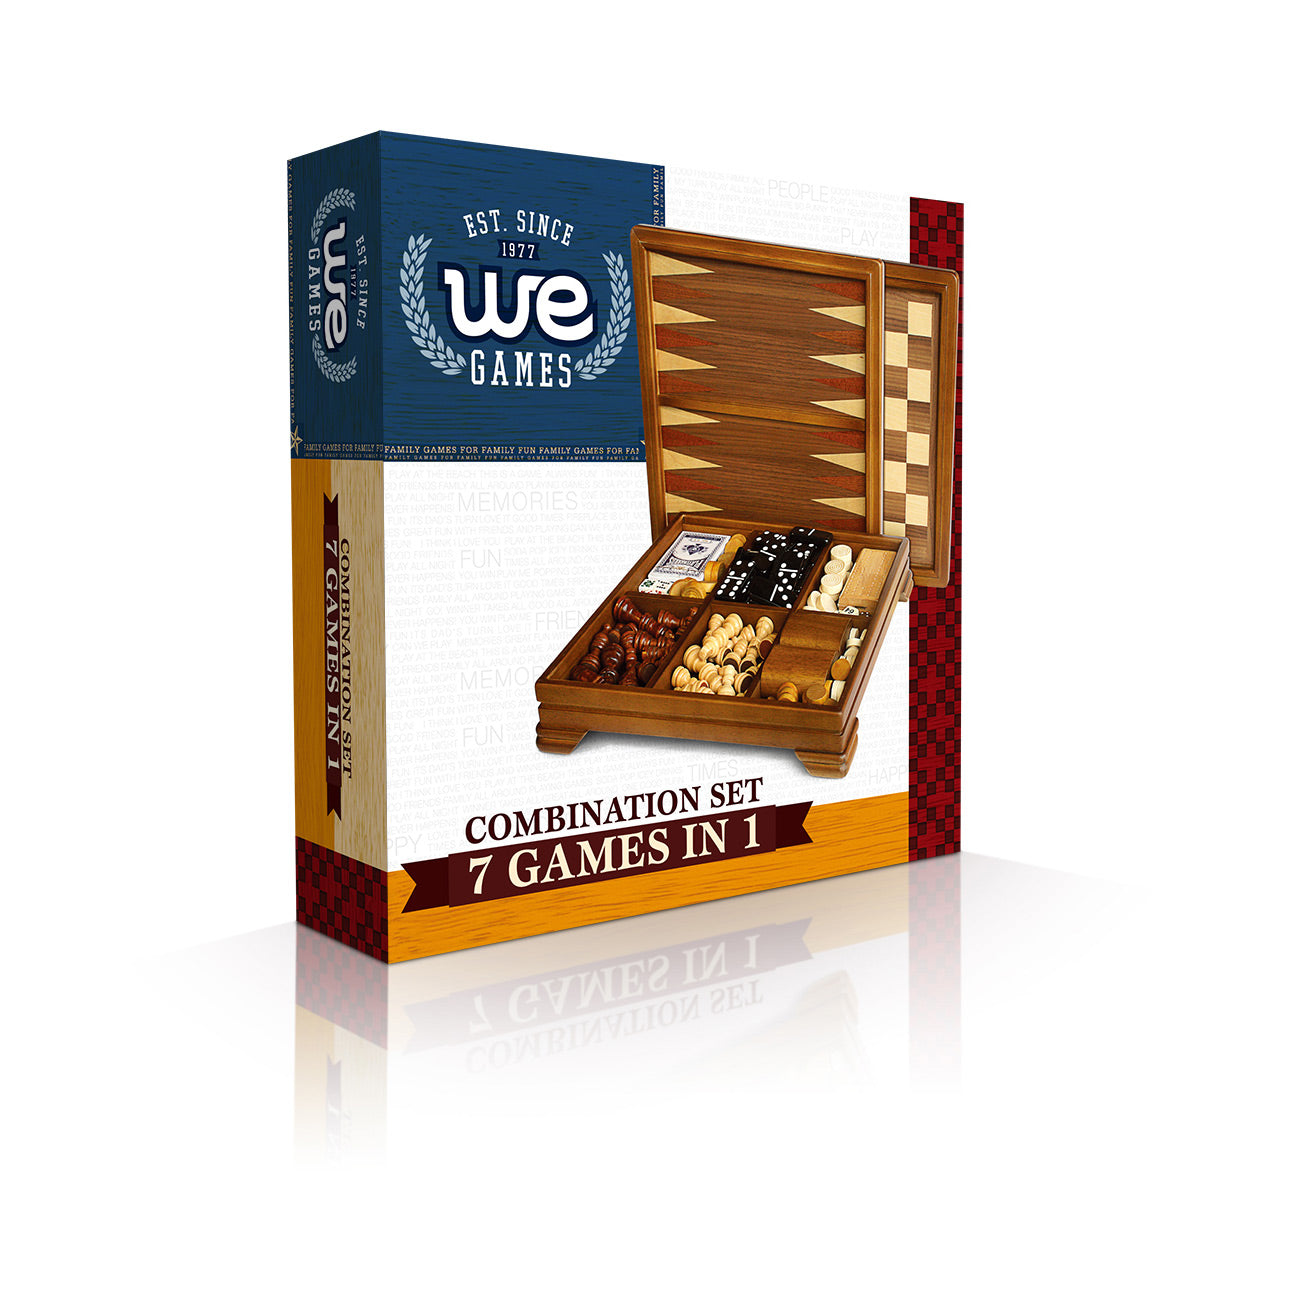 Walnut 7-Games-in-1 Combination Game Set – Includes Chess, Checkers, Backgammon, Dominoes, Cribbage, Poker Dice and Cards